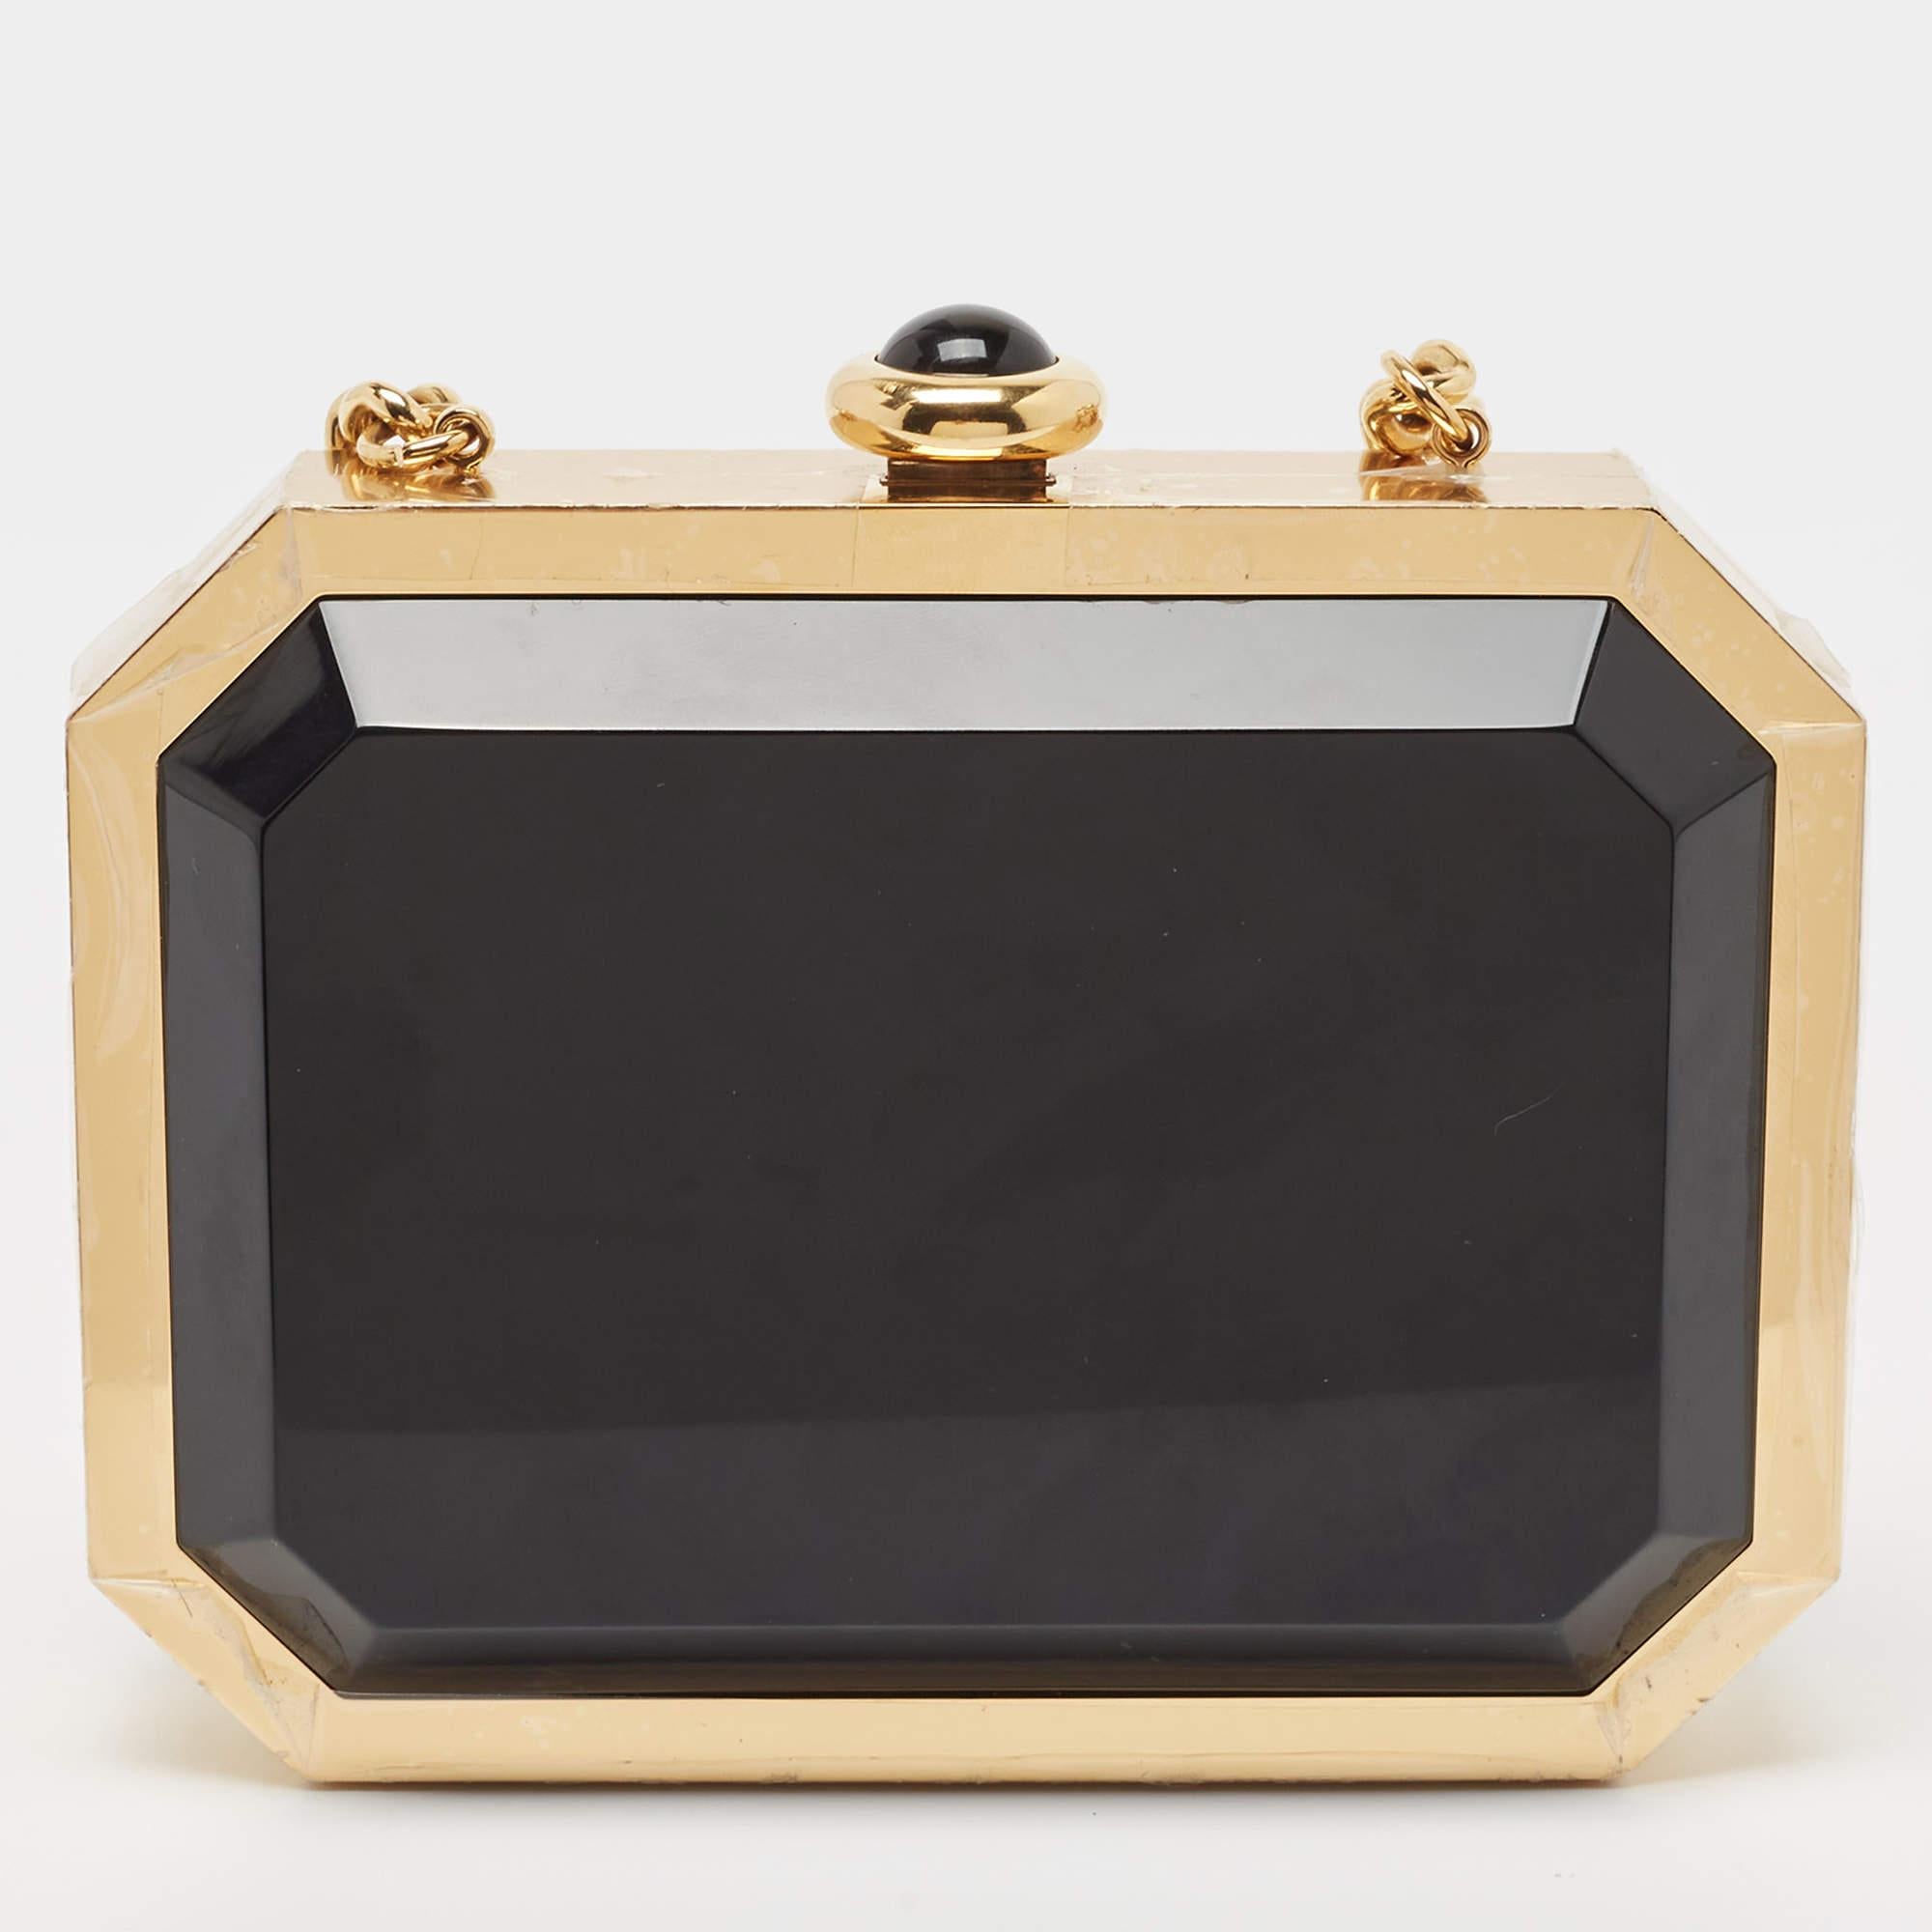 Every creation of Chanel maintains the legacy of the brand with its brilliant craftsmanship and artistic designs. From the brand's range of the most exclusive clutch designs comes this Premiere minaudiere clutch made of plexiglass and gold-tone